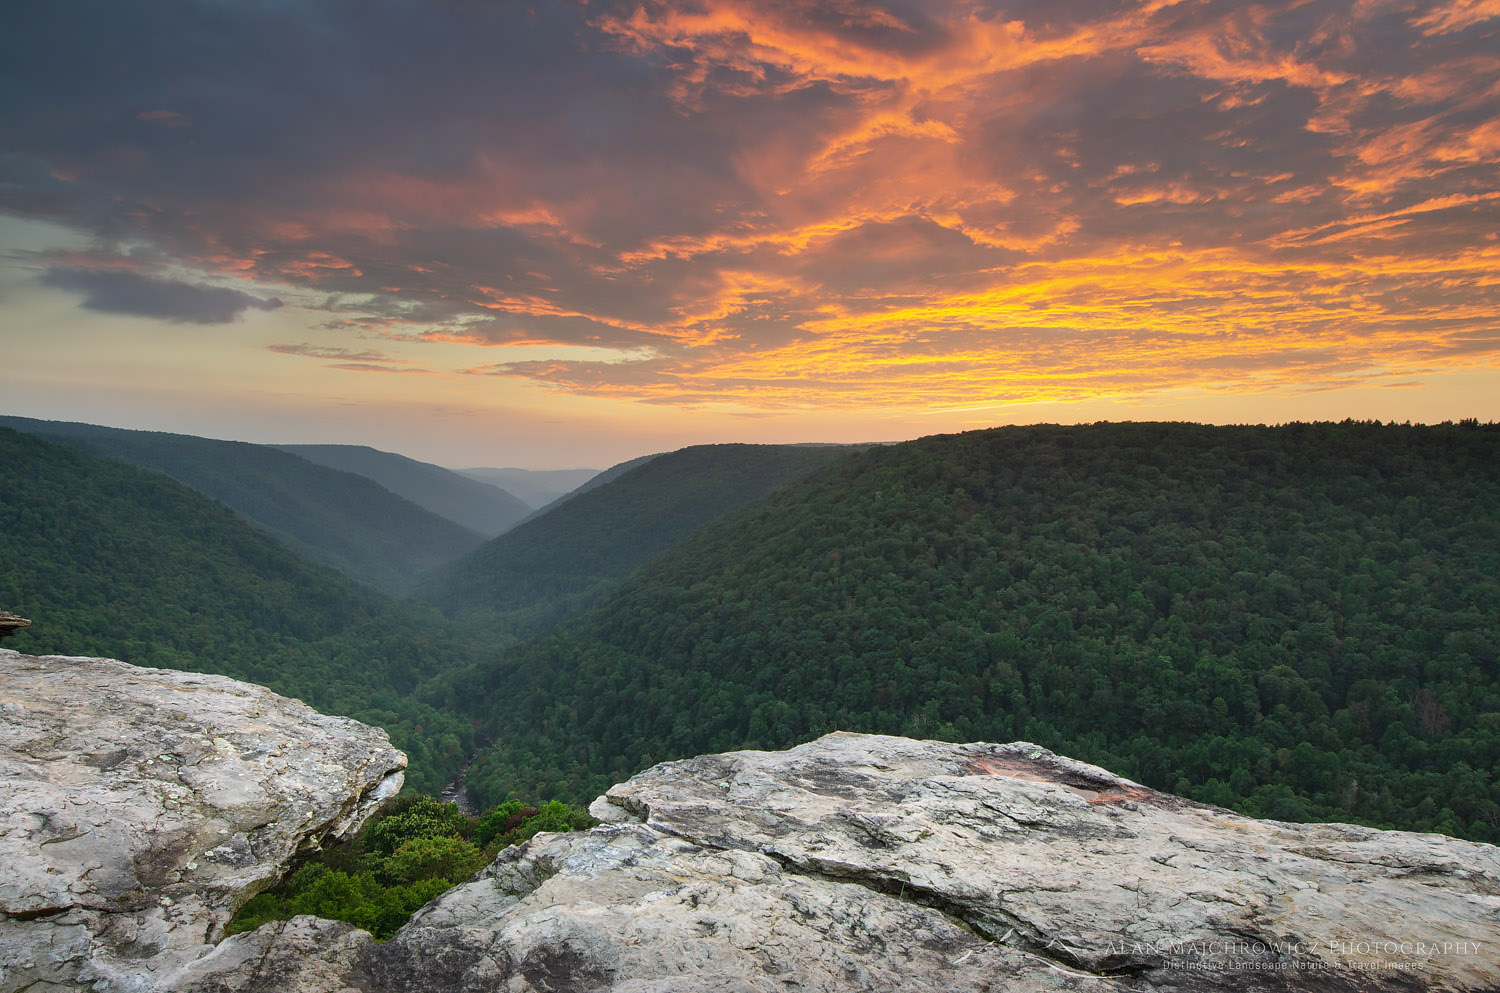 Clouds glowing in twilight afterglow. Lindy Point Overlook, Blackwater Falls West Virginia #63444